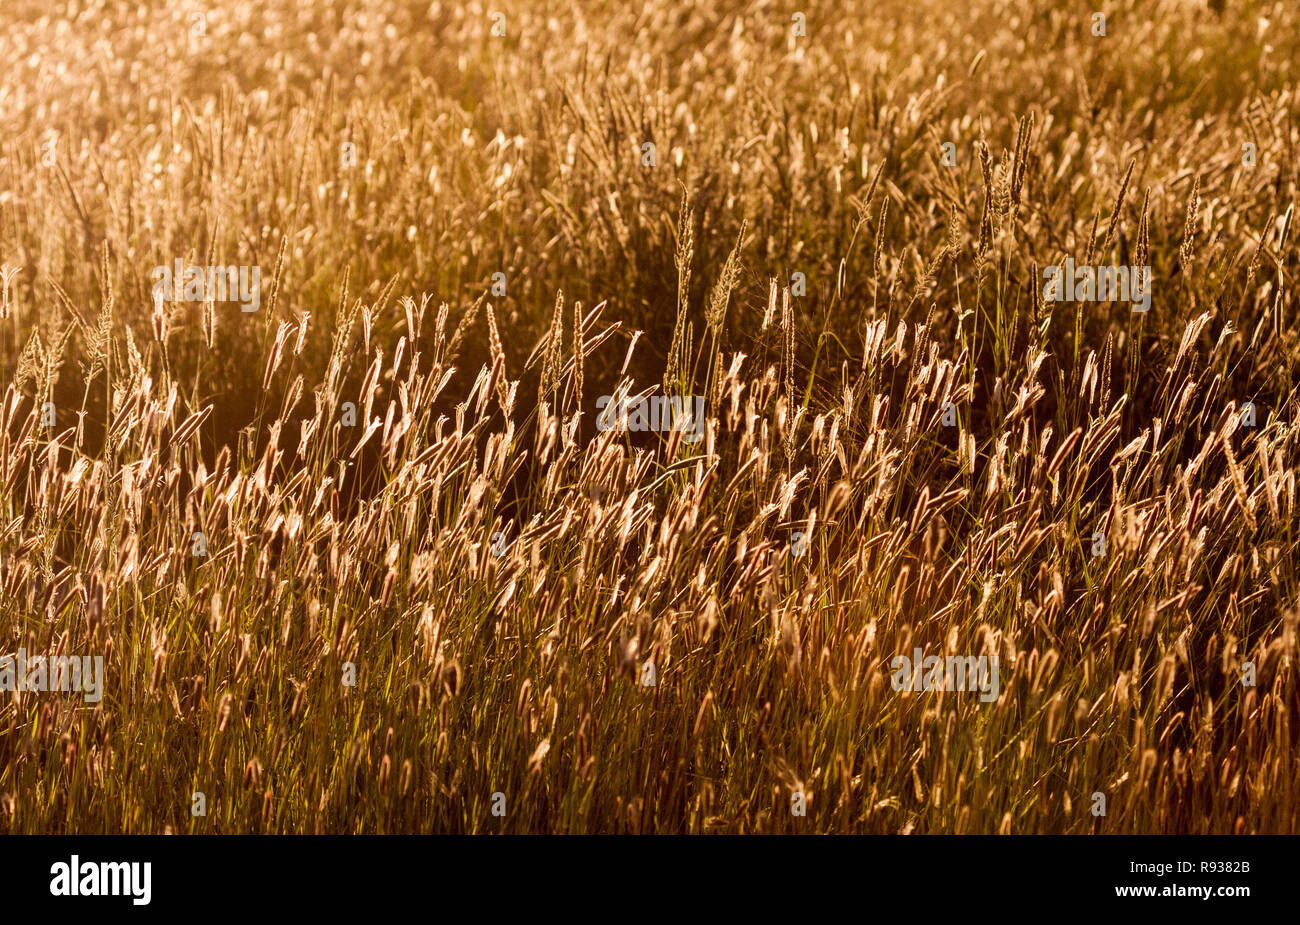 Grasses glowing in golden light. Stock Photo